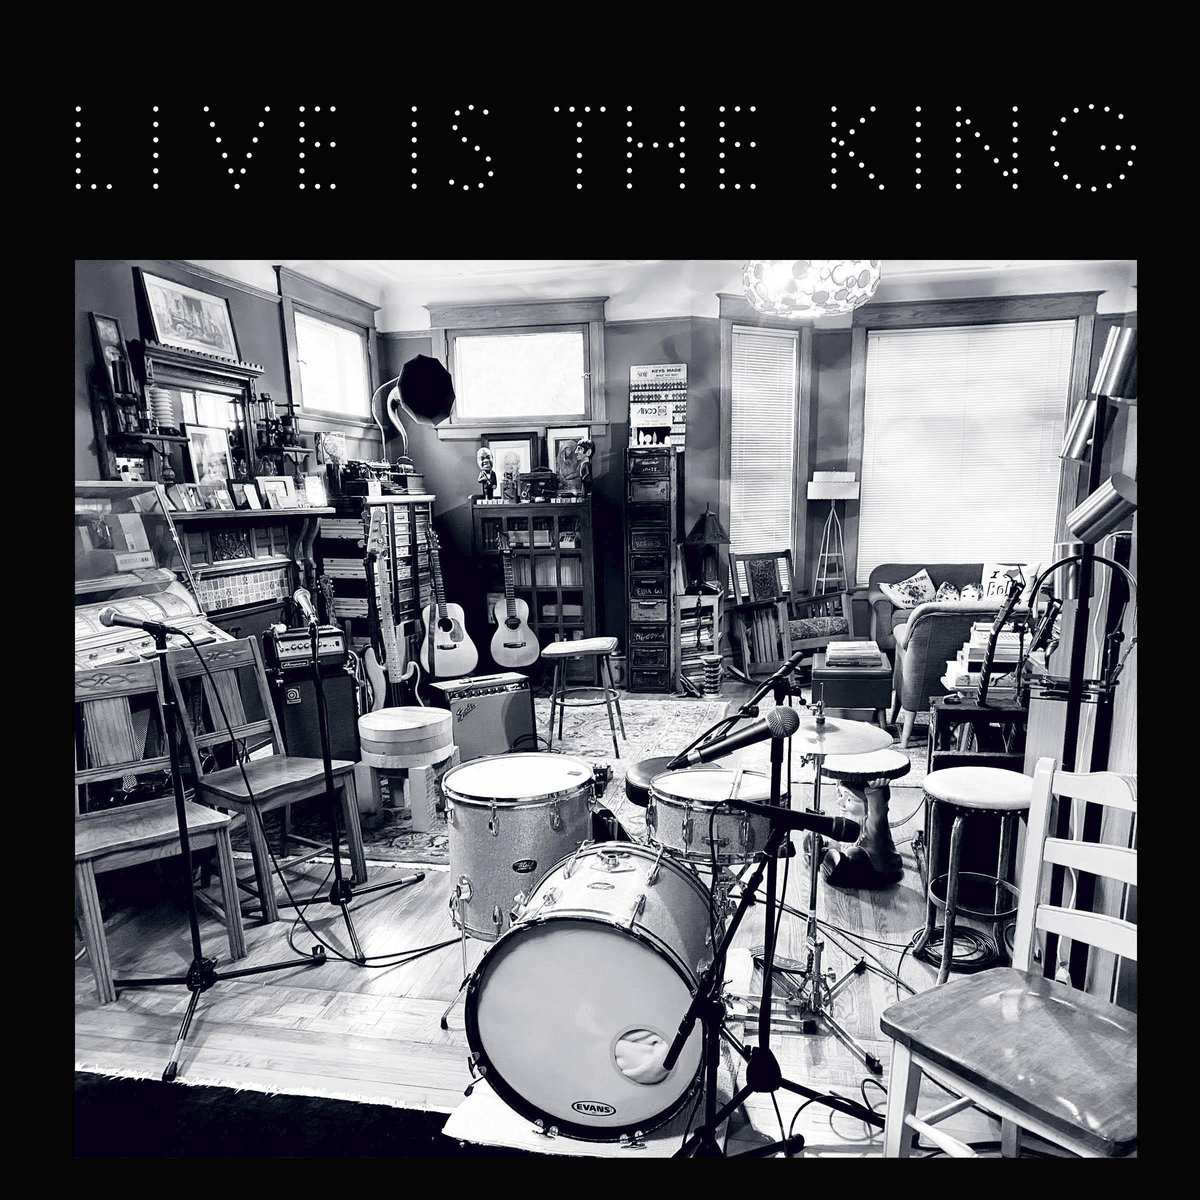 Live Is The King artwork